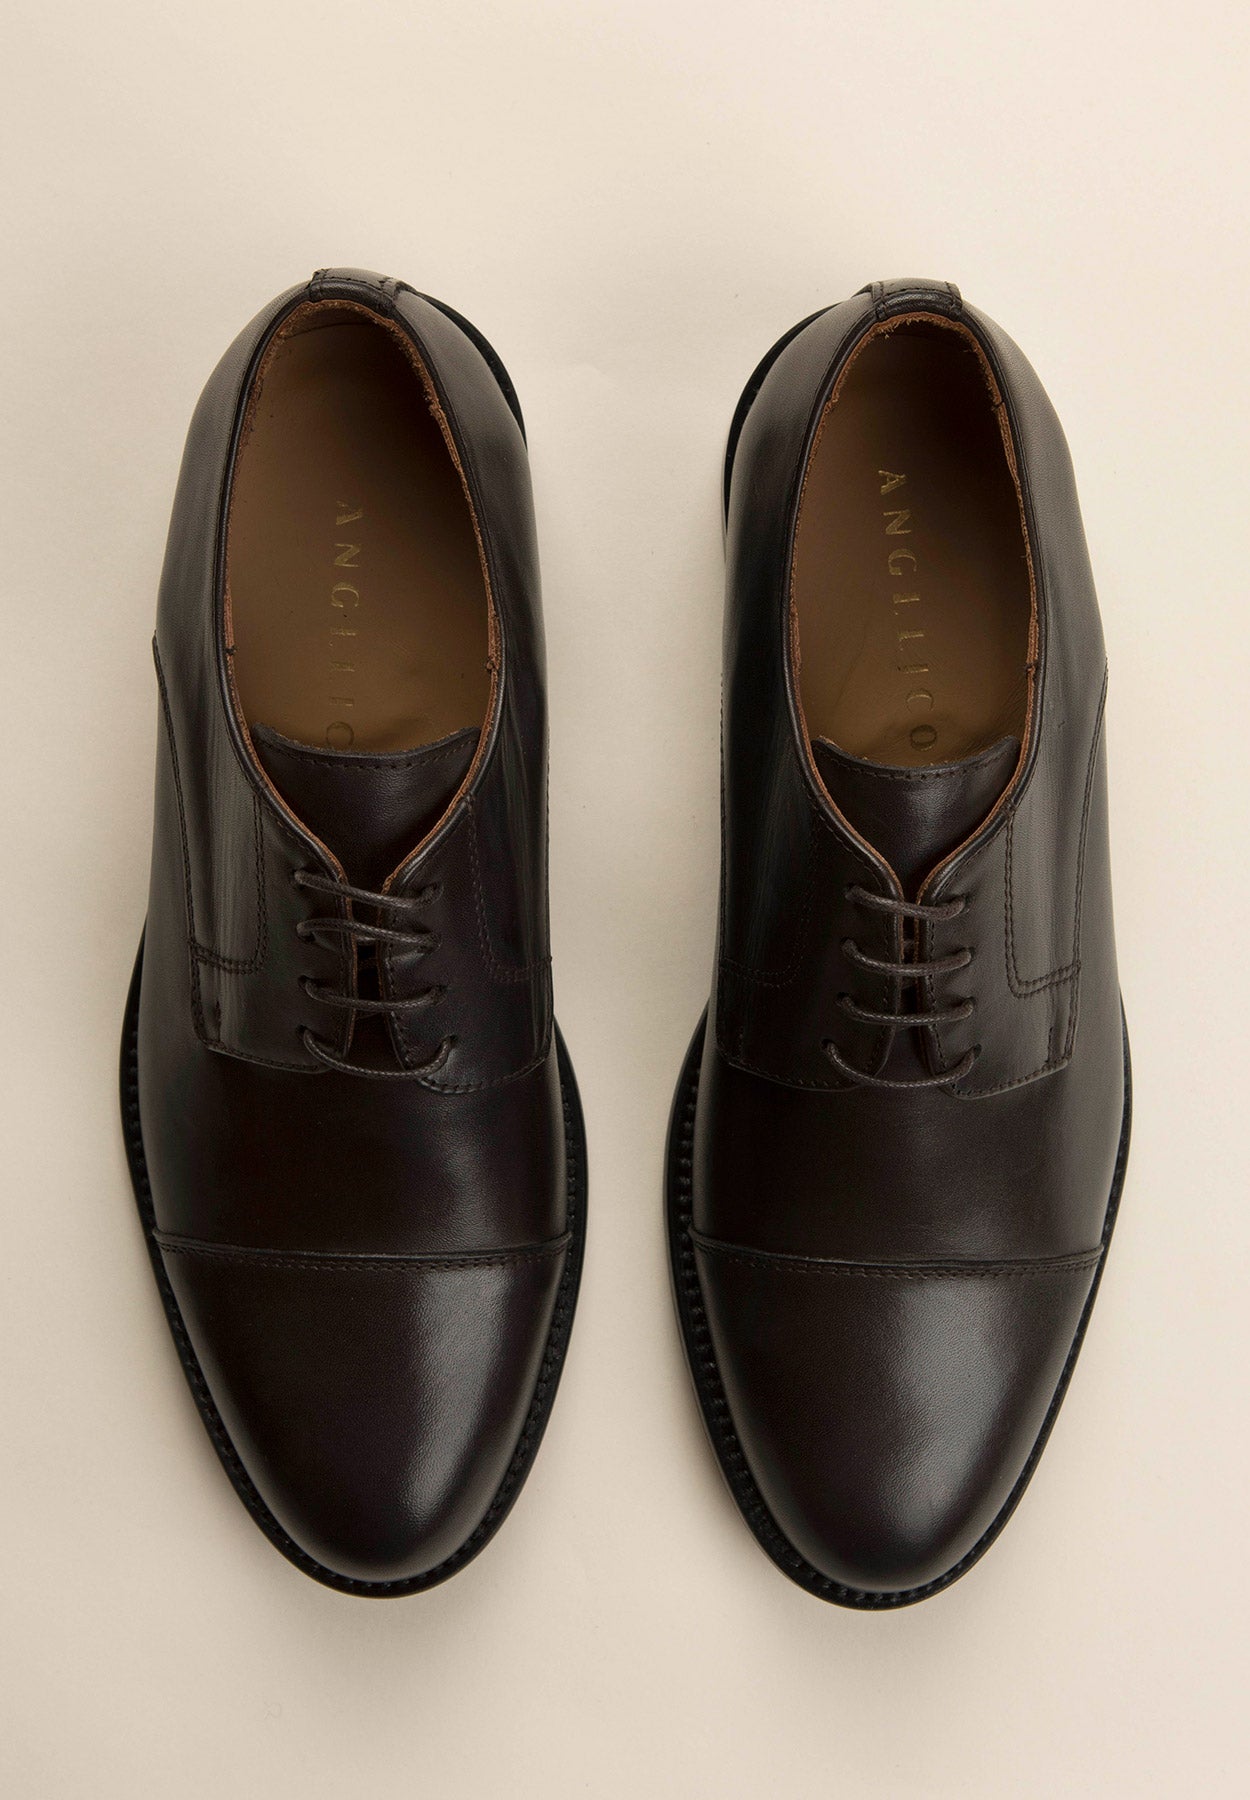 Dark Brown leather derby shoe with stitched toe cap